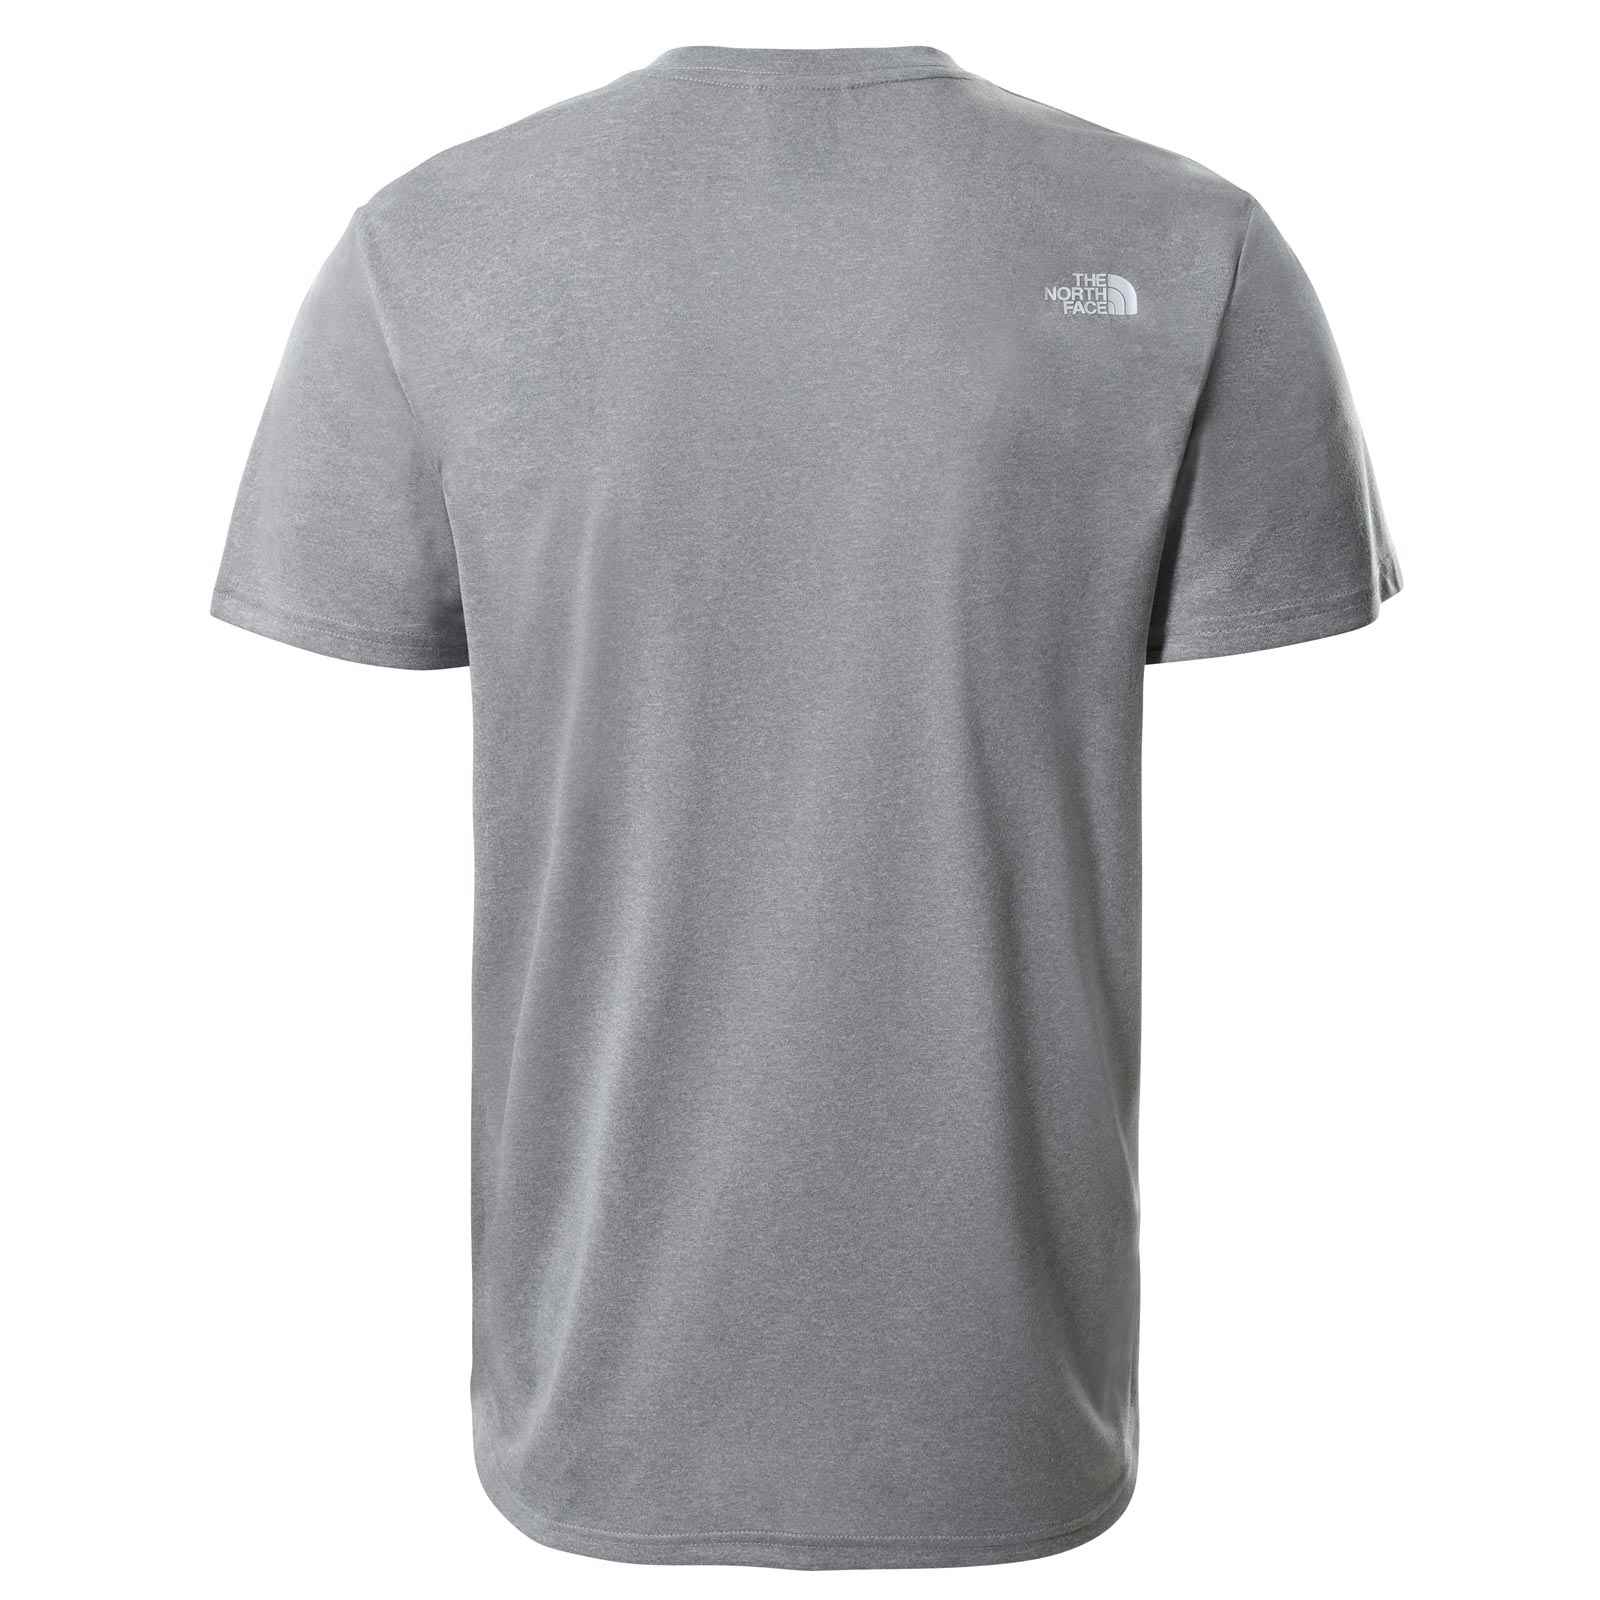 THE NORTH FACE MENS REAXION EASY T-SHIRT